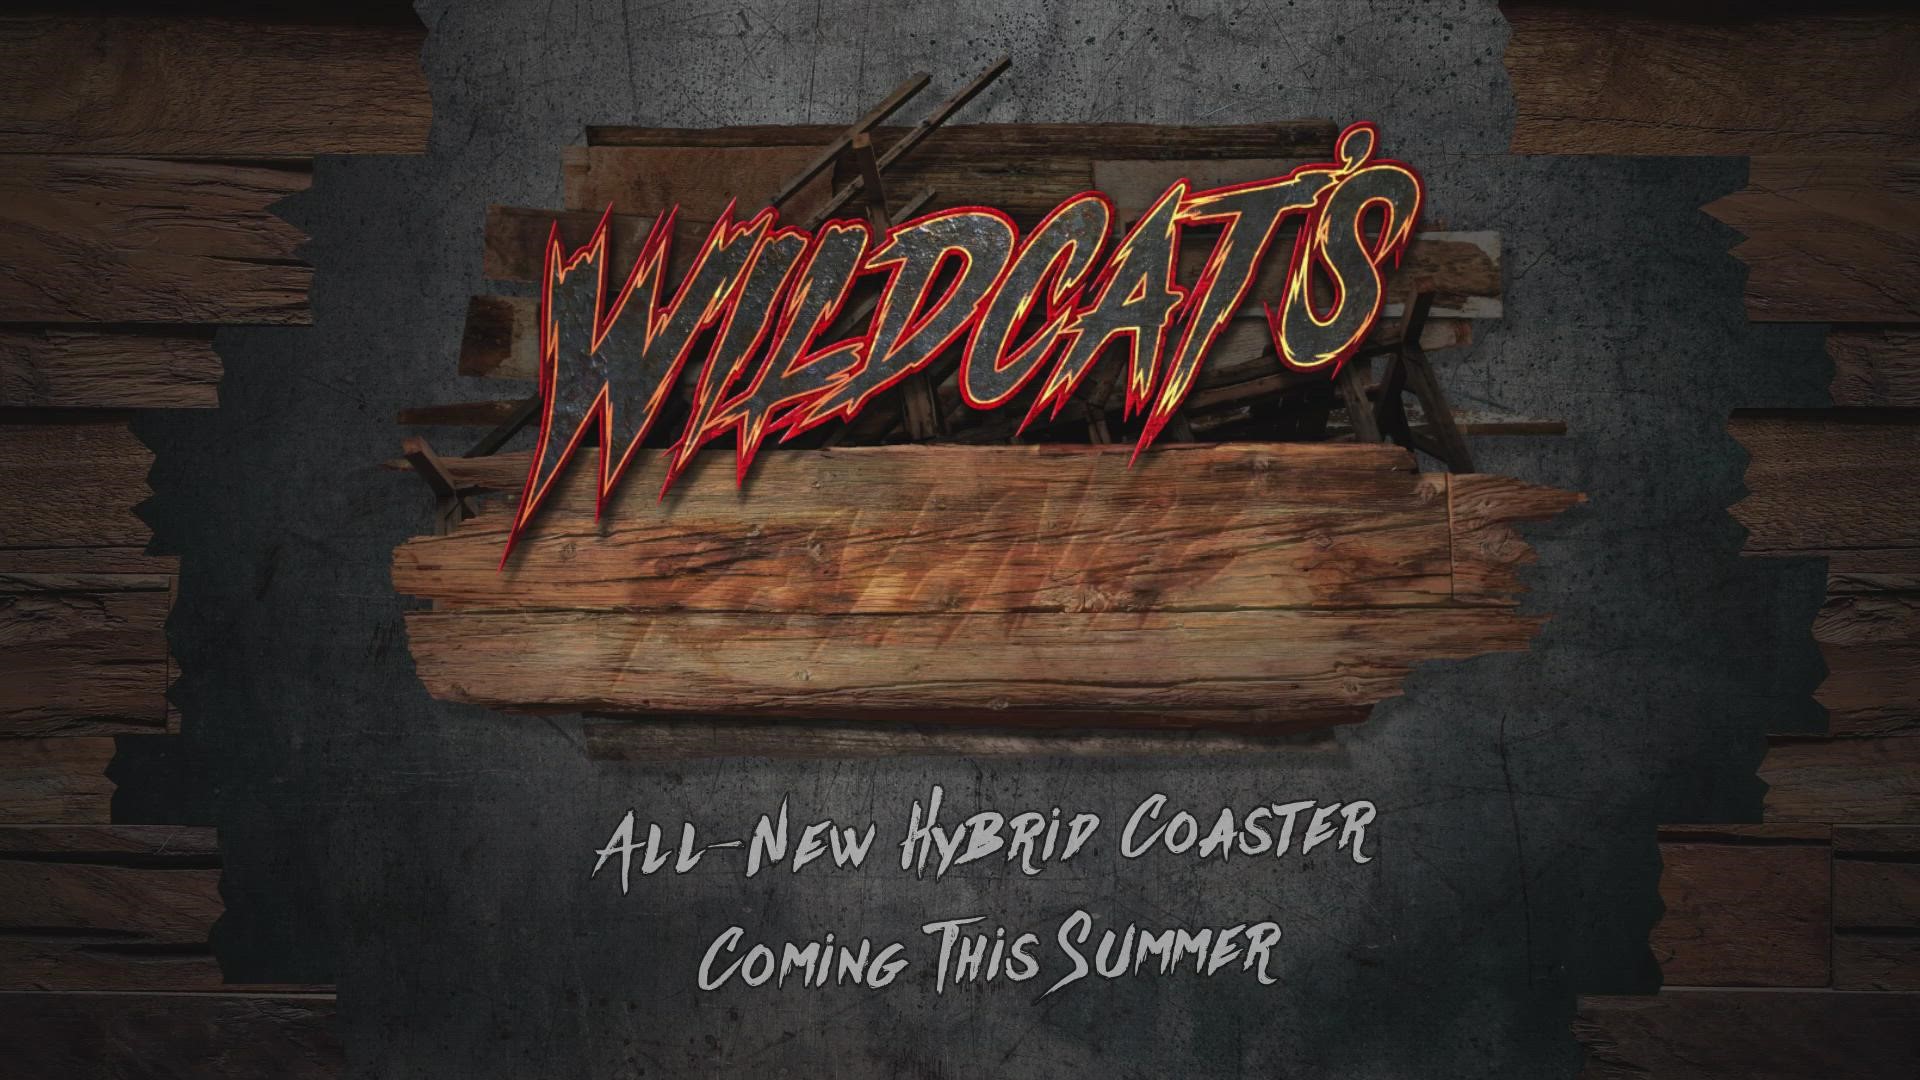 The park announced that Wildcat's Revenge, a new, wood and steel hybrid roller coaster, will open in the Midway area of the park next summer.